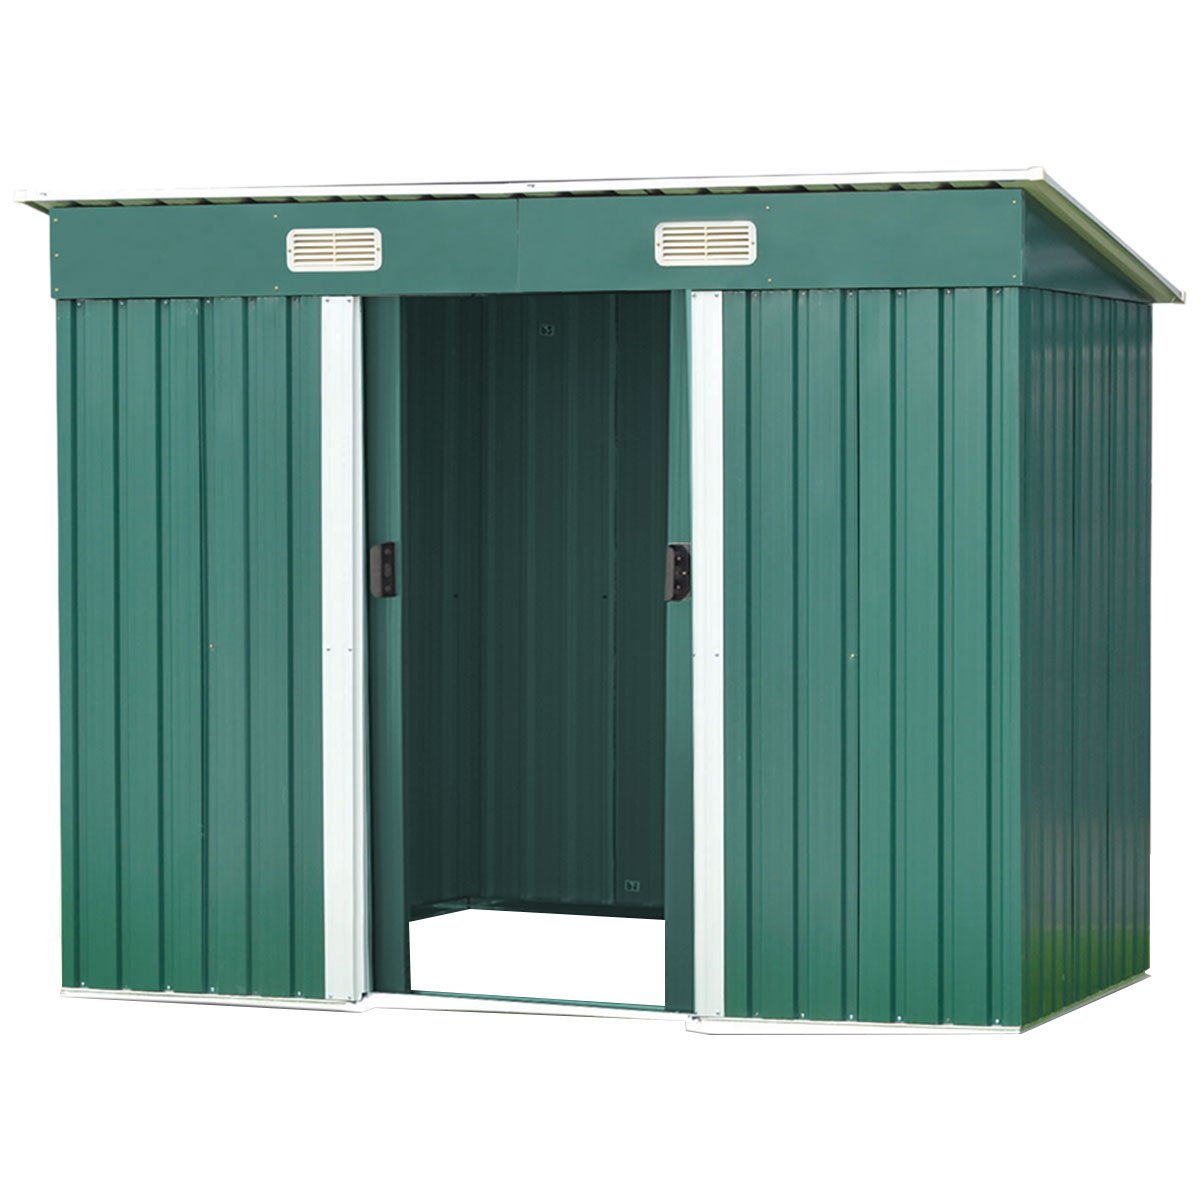 Wallaroo Garden Shed Flat 4ft x 6ft Outdoor Storage Shelter - Green